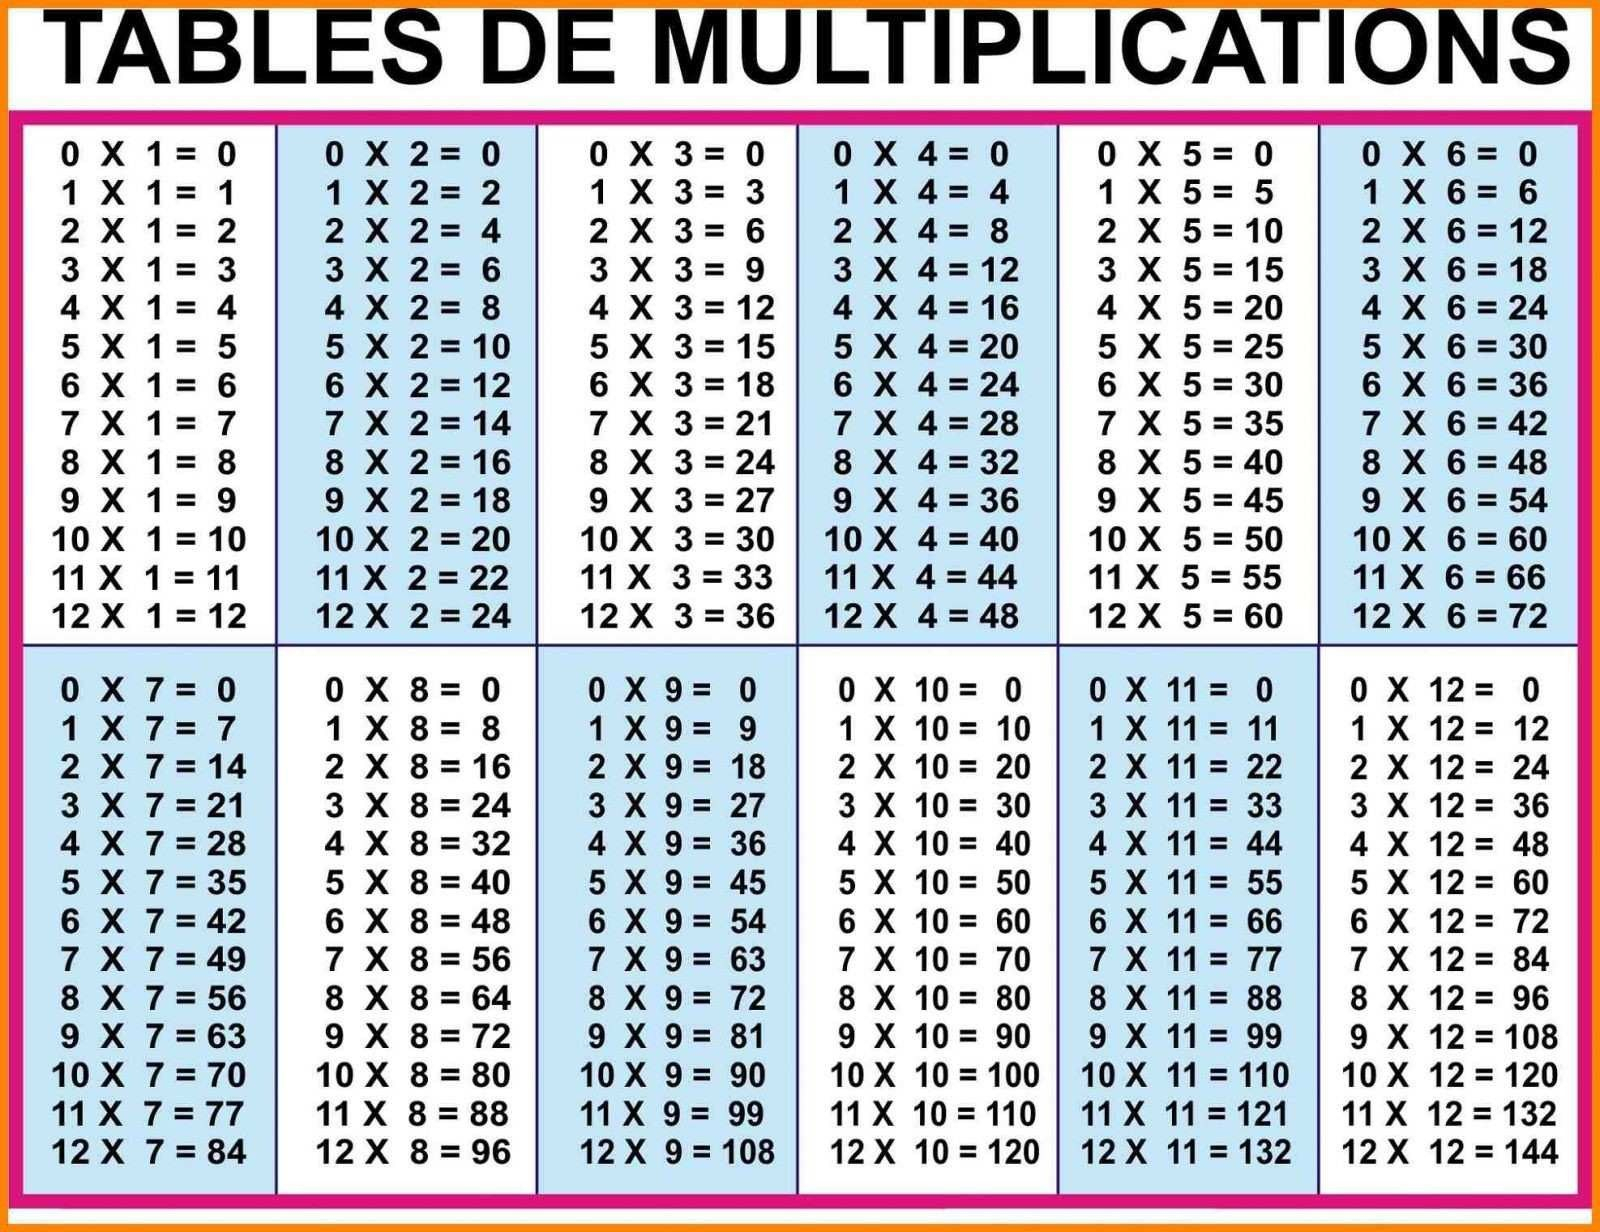 Printable Multiplication Table Chart Up To 20 - New Blog regarding Printable Multiplication Chart Up To 20